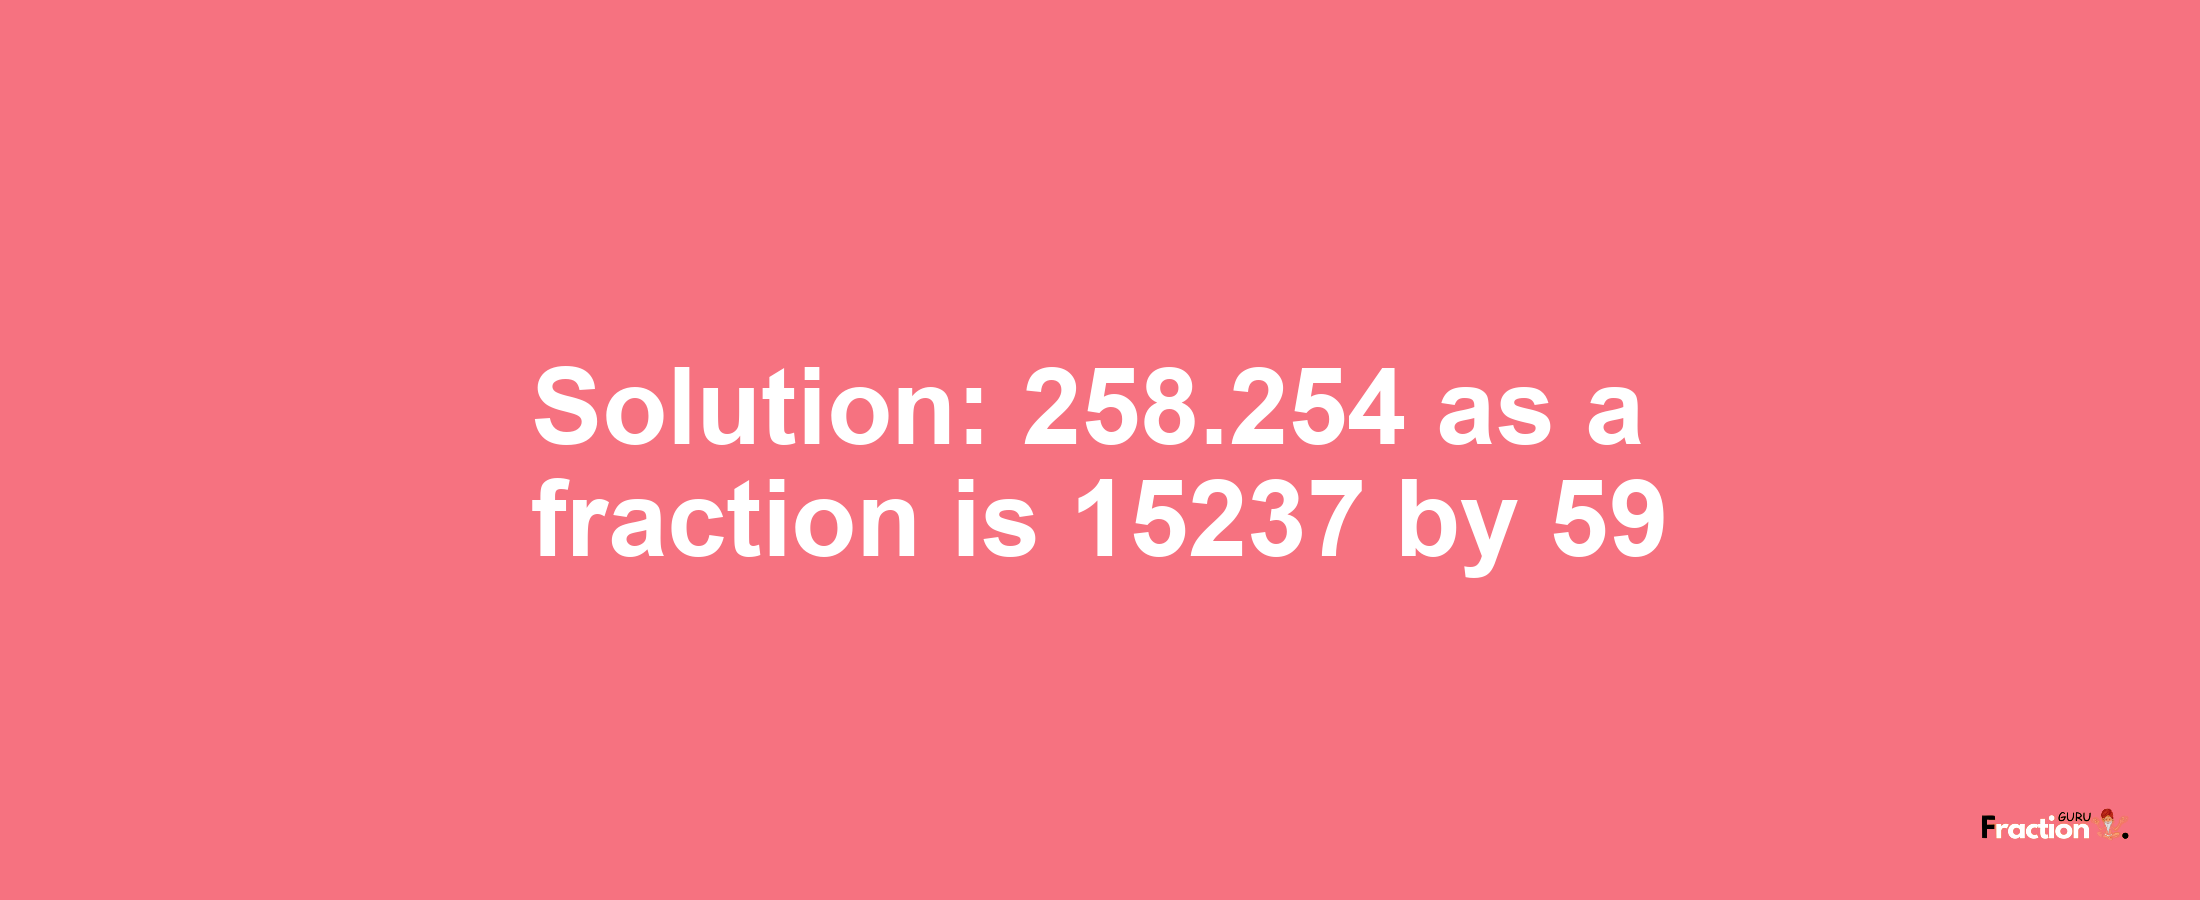 Solution:258.254 as a fraction is 15237/59